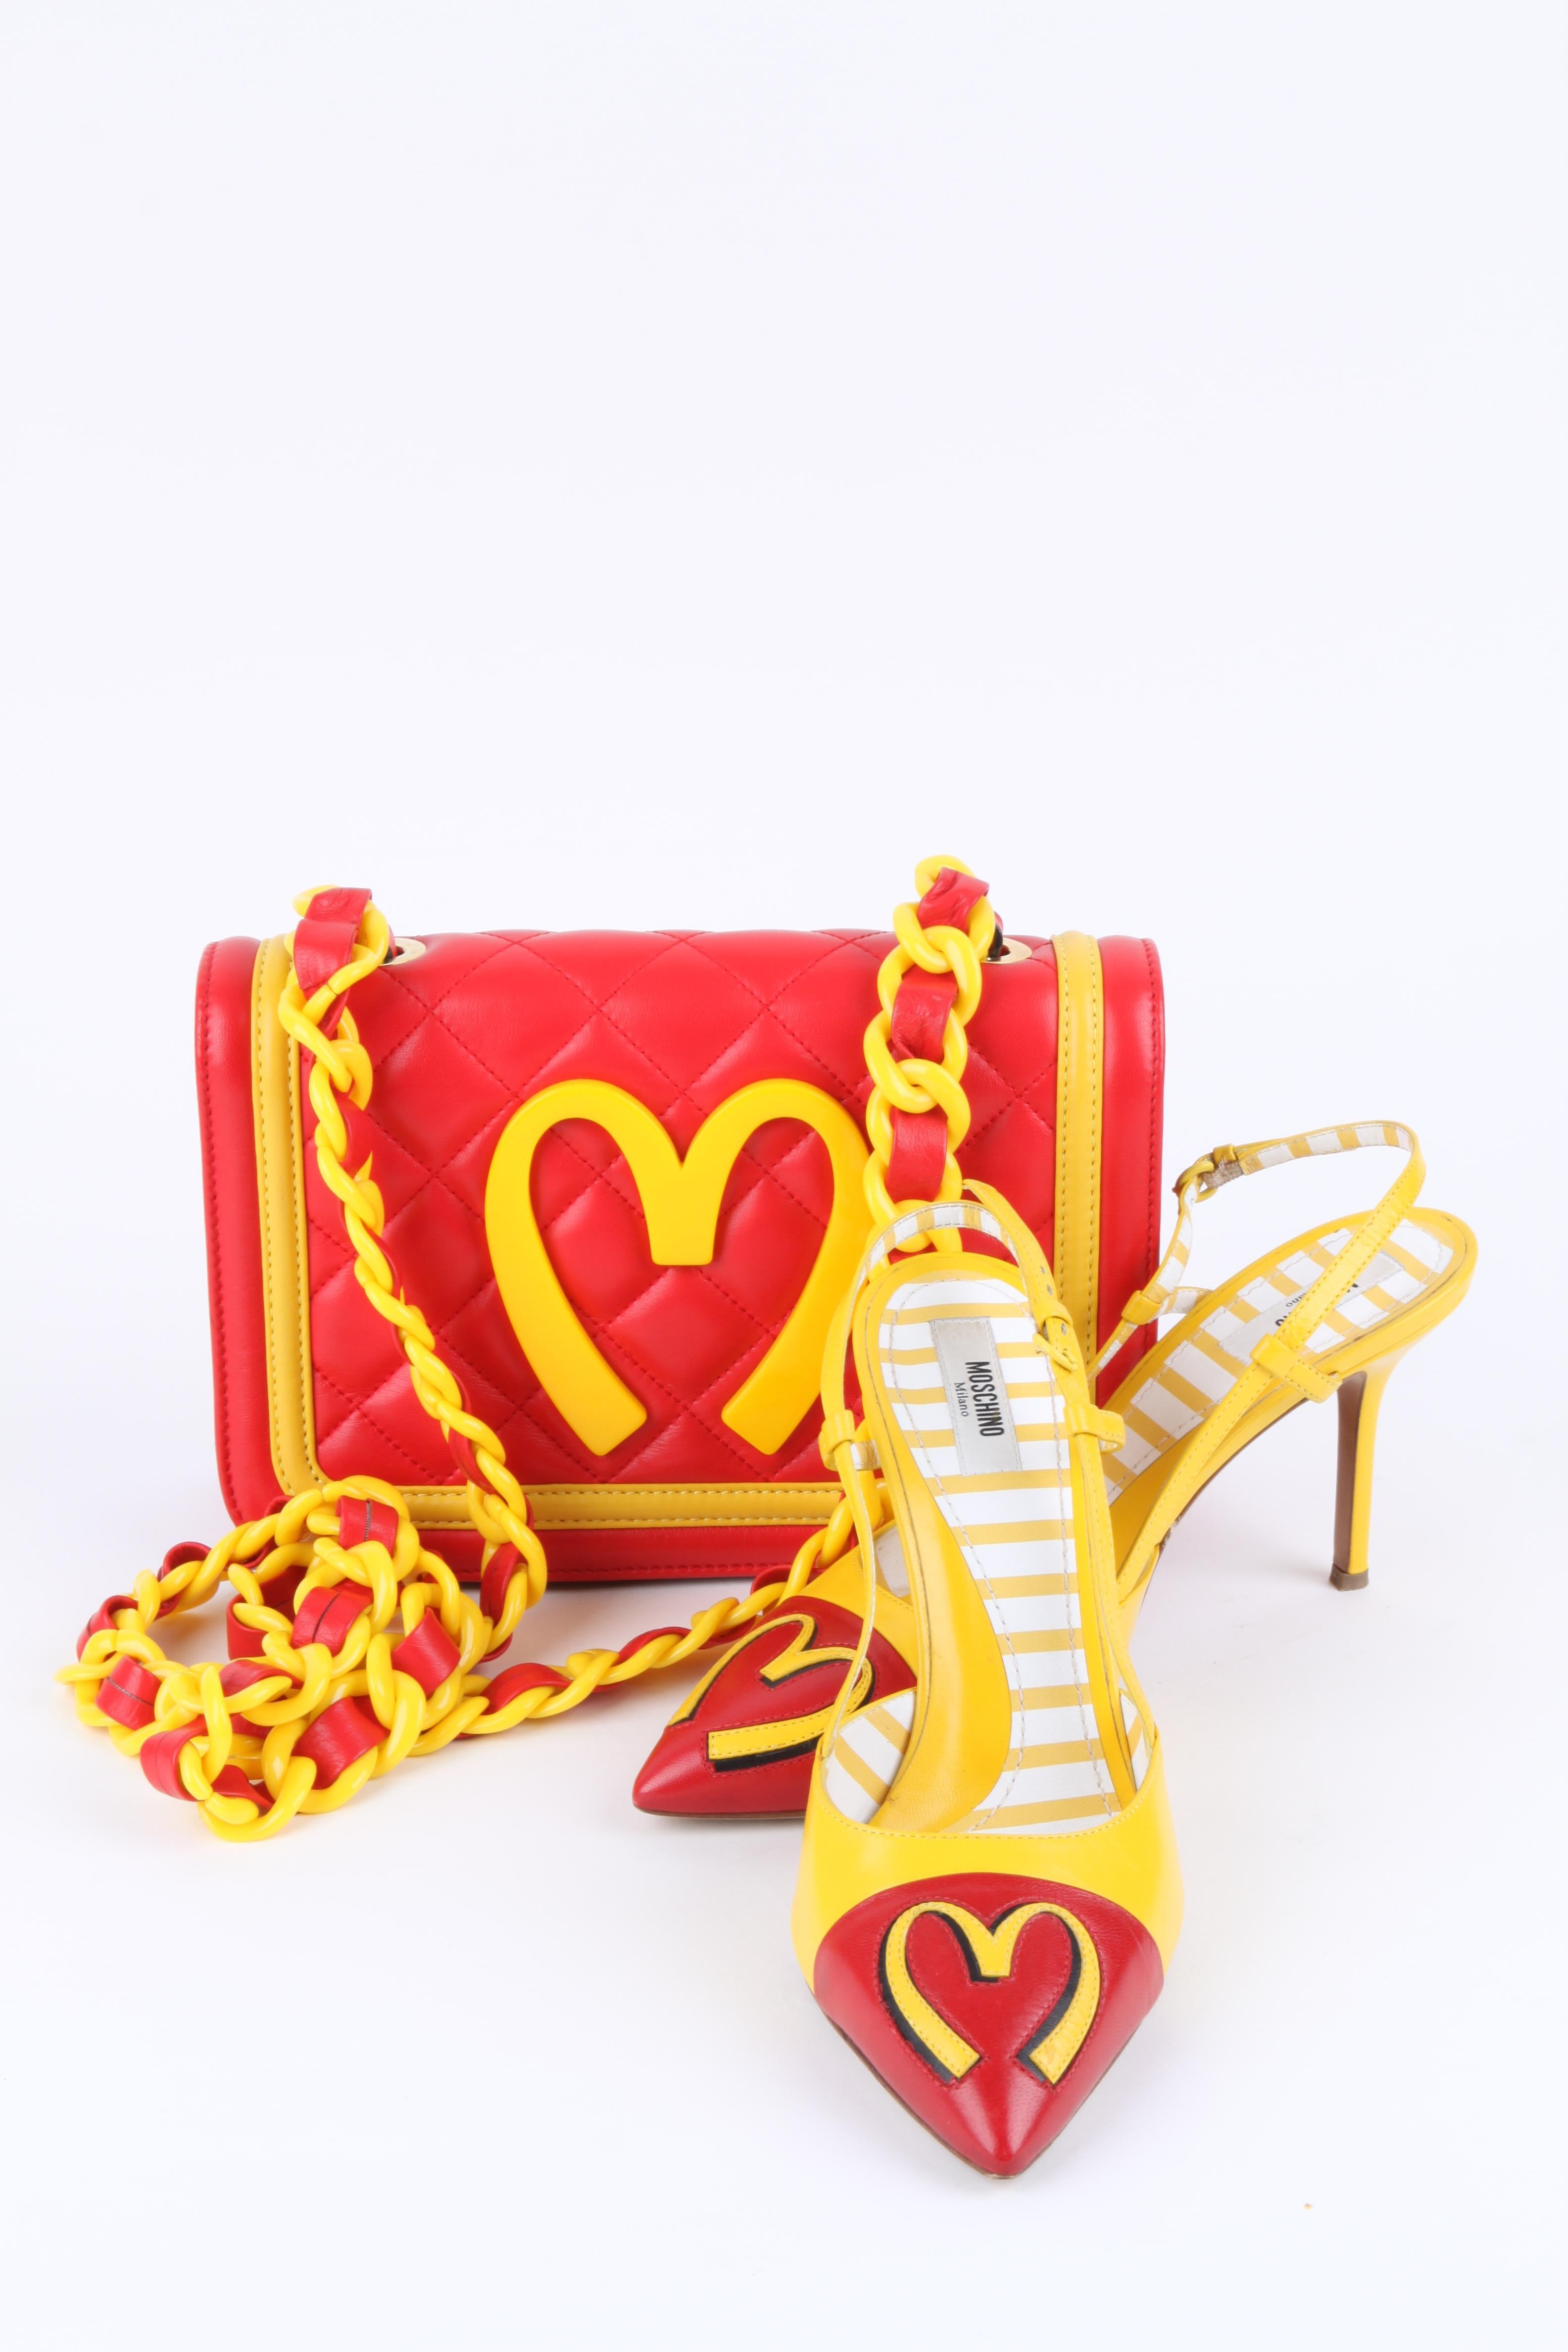 eremy Scott designed these shoes for Moschino. On the red cap toe you find a large yellow M, the rest of the shoe is crafted in yellow leather. The heel measures 10 centimeters, no platform.

In very good condition, yet worn a few times, only